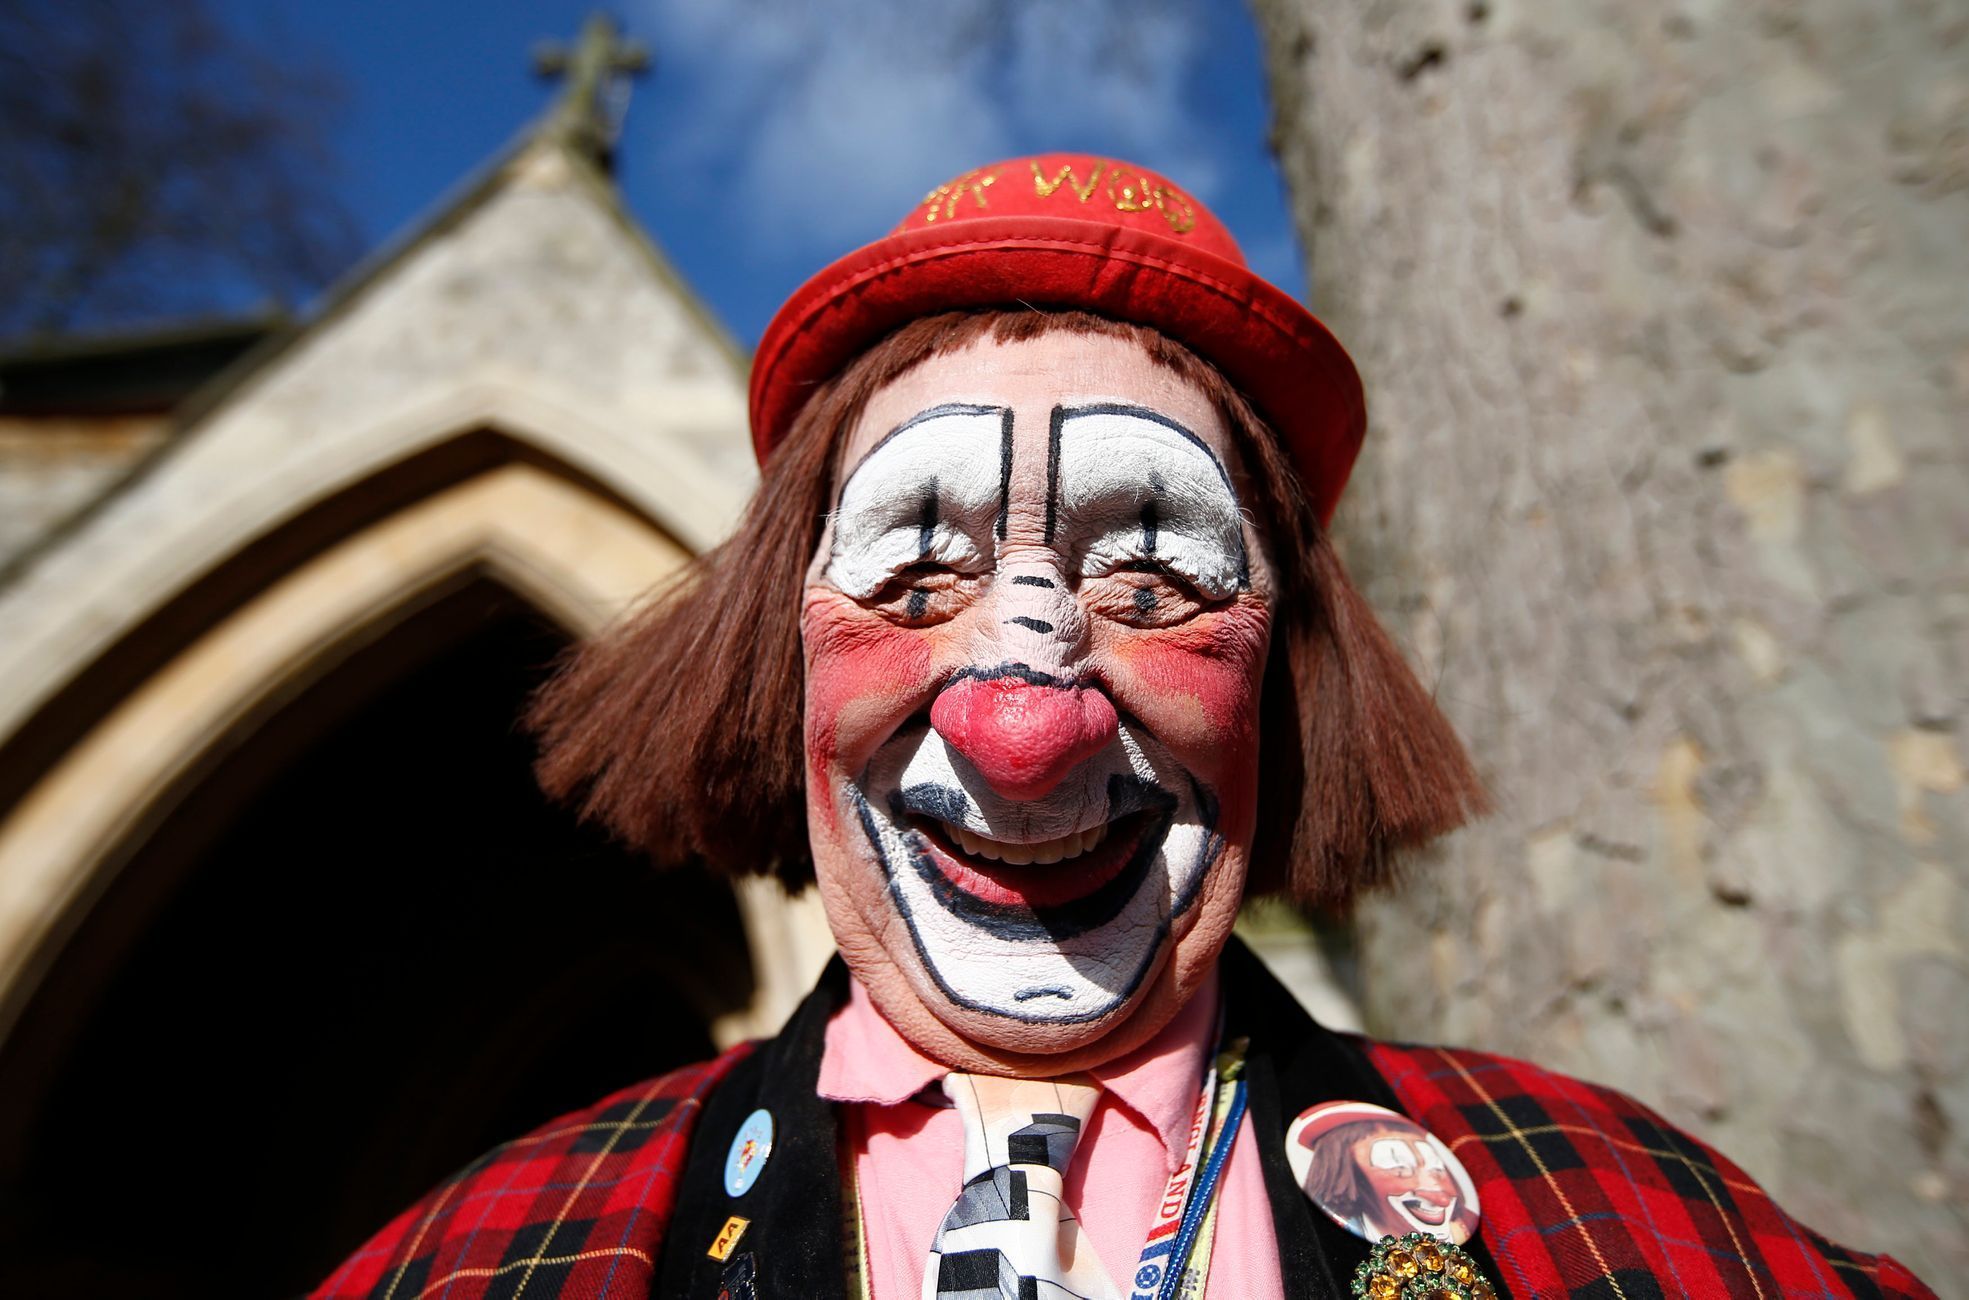 The clown &quot;Mr. Woo&quot; arrives at the All Saints Church before the Grimaldi clown service in Dalston, north London